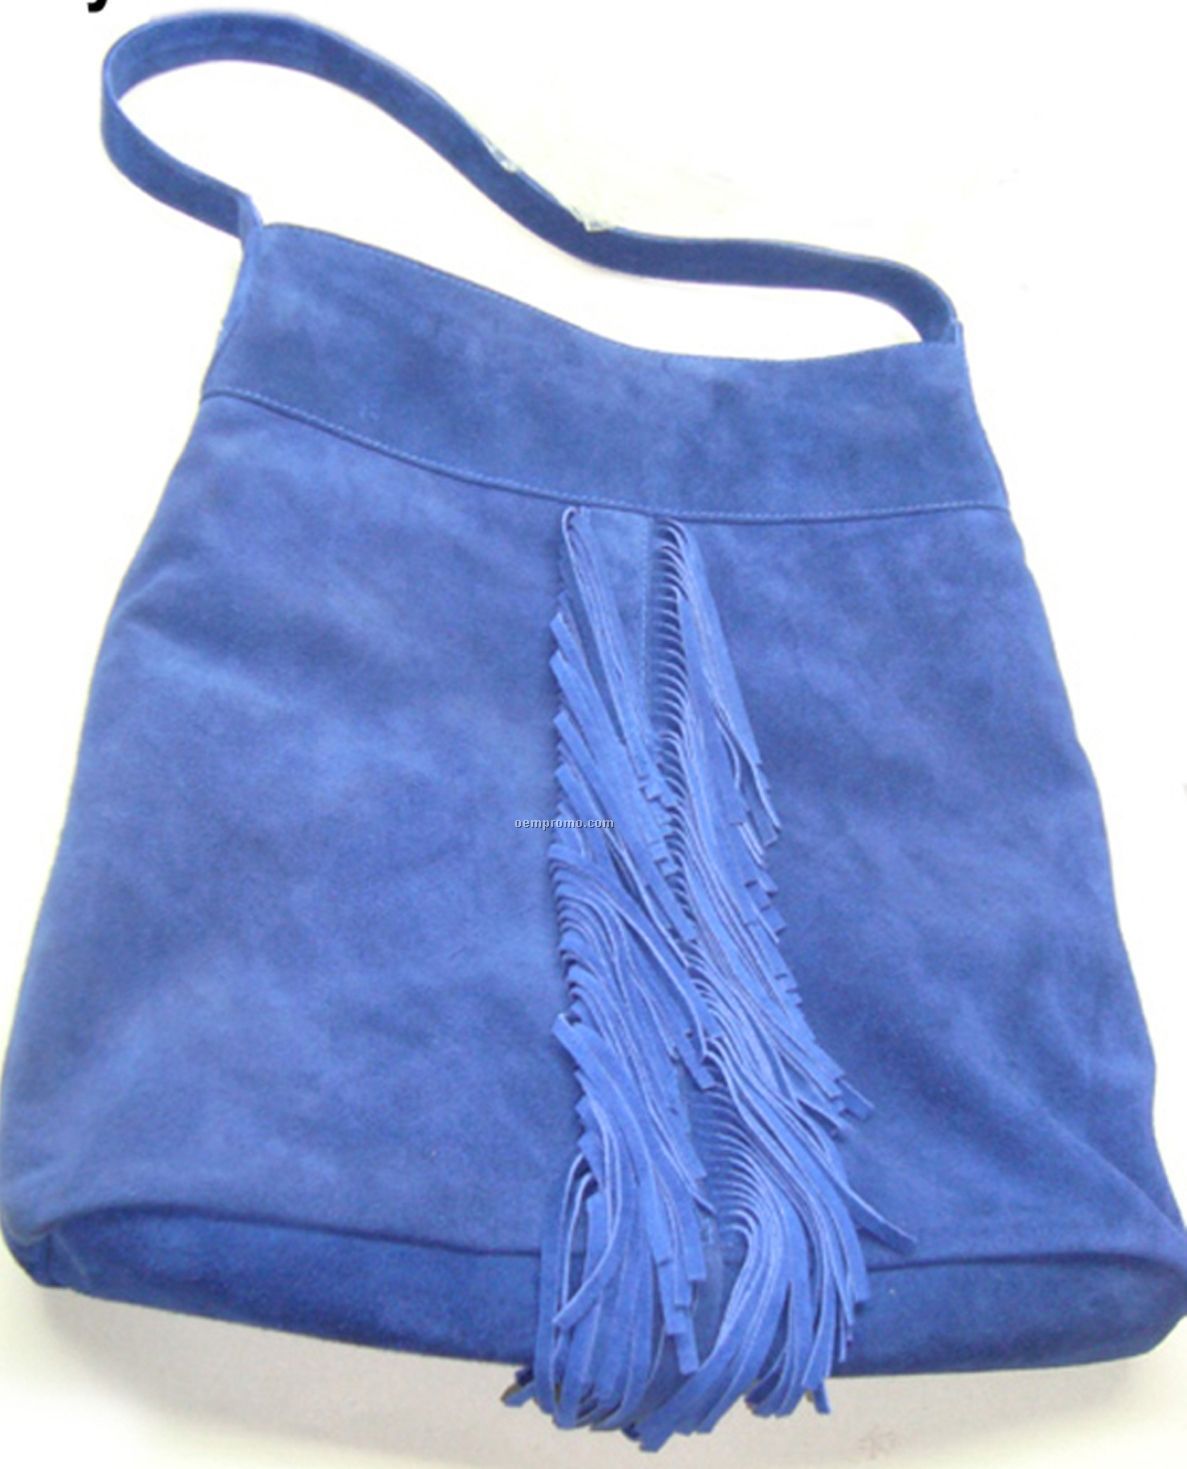 Blue Purse W/ Fringed Front